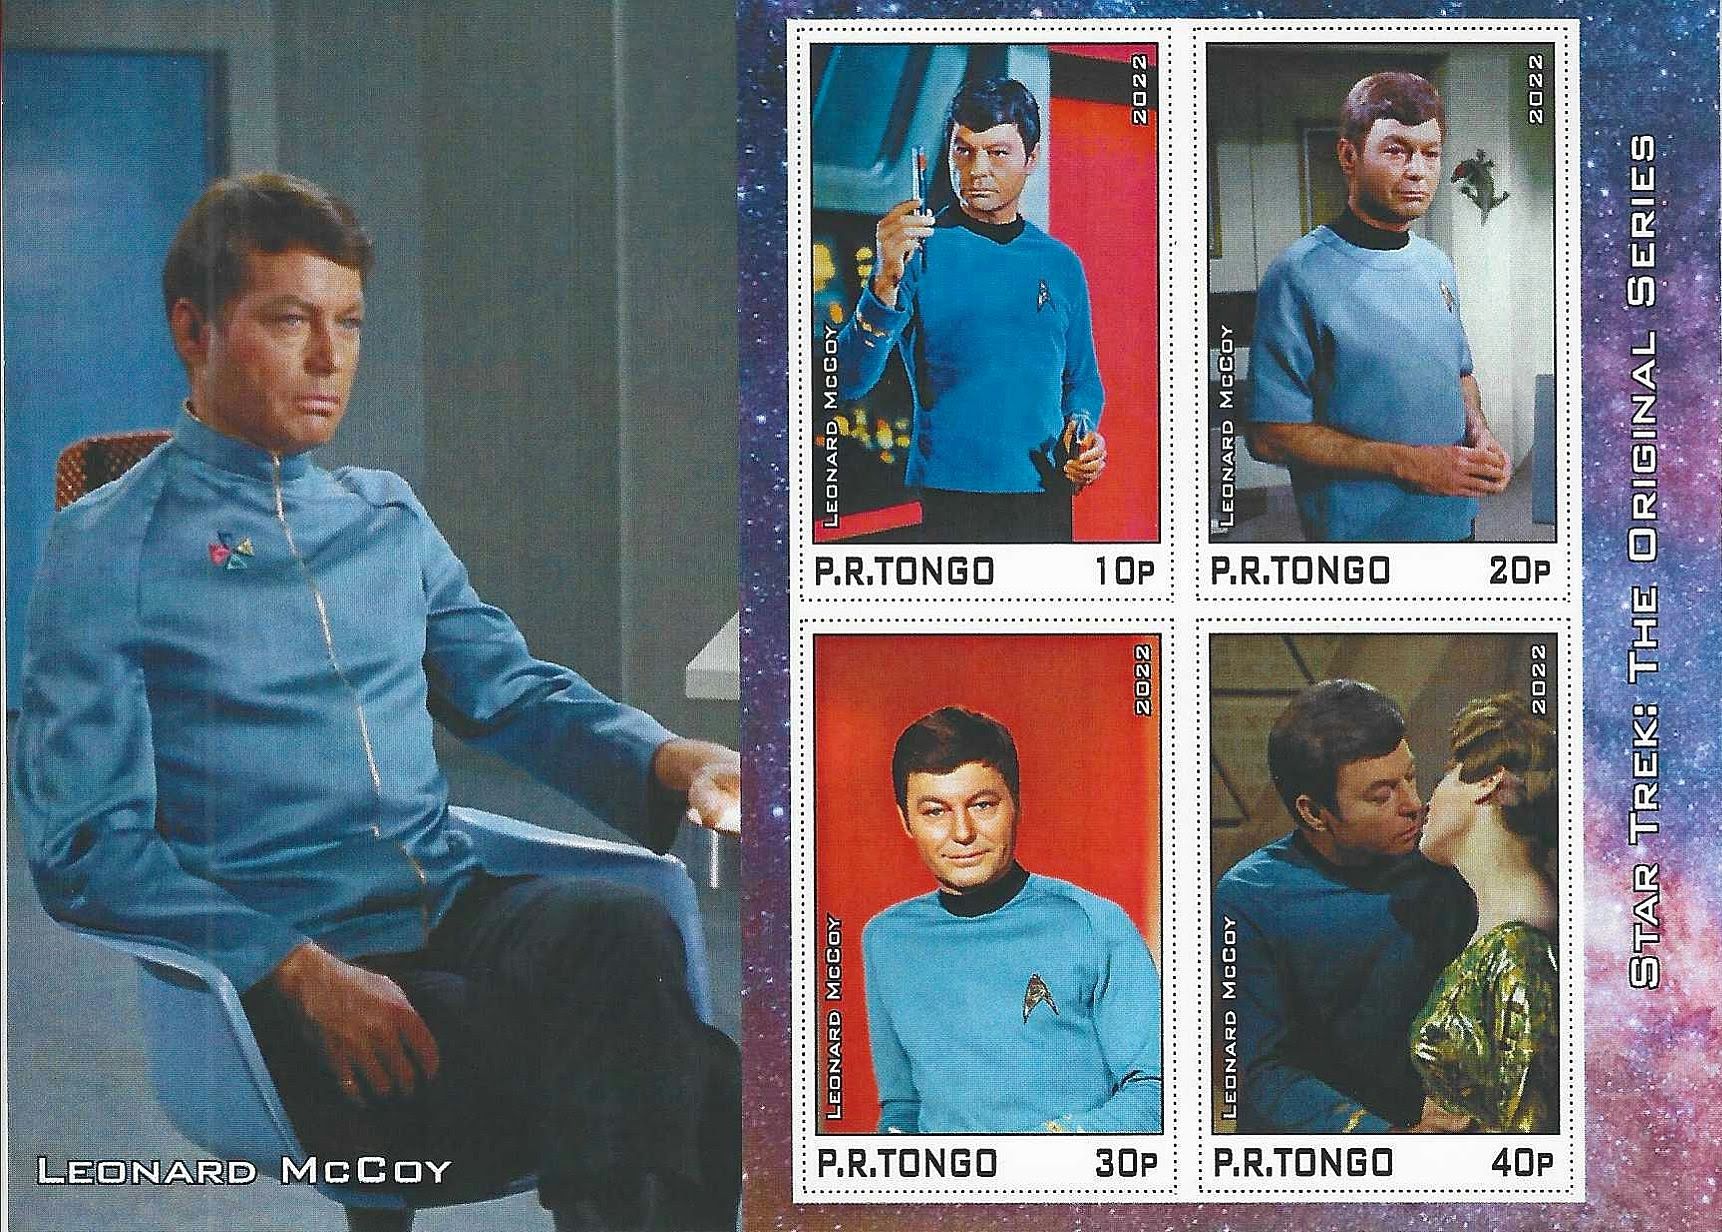 Star Trek stamps from Tongo